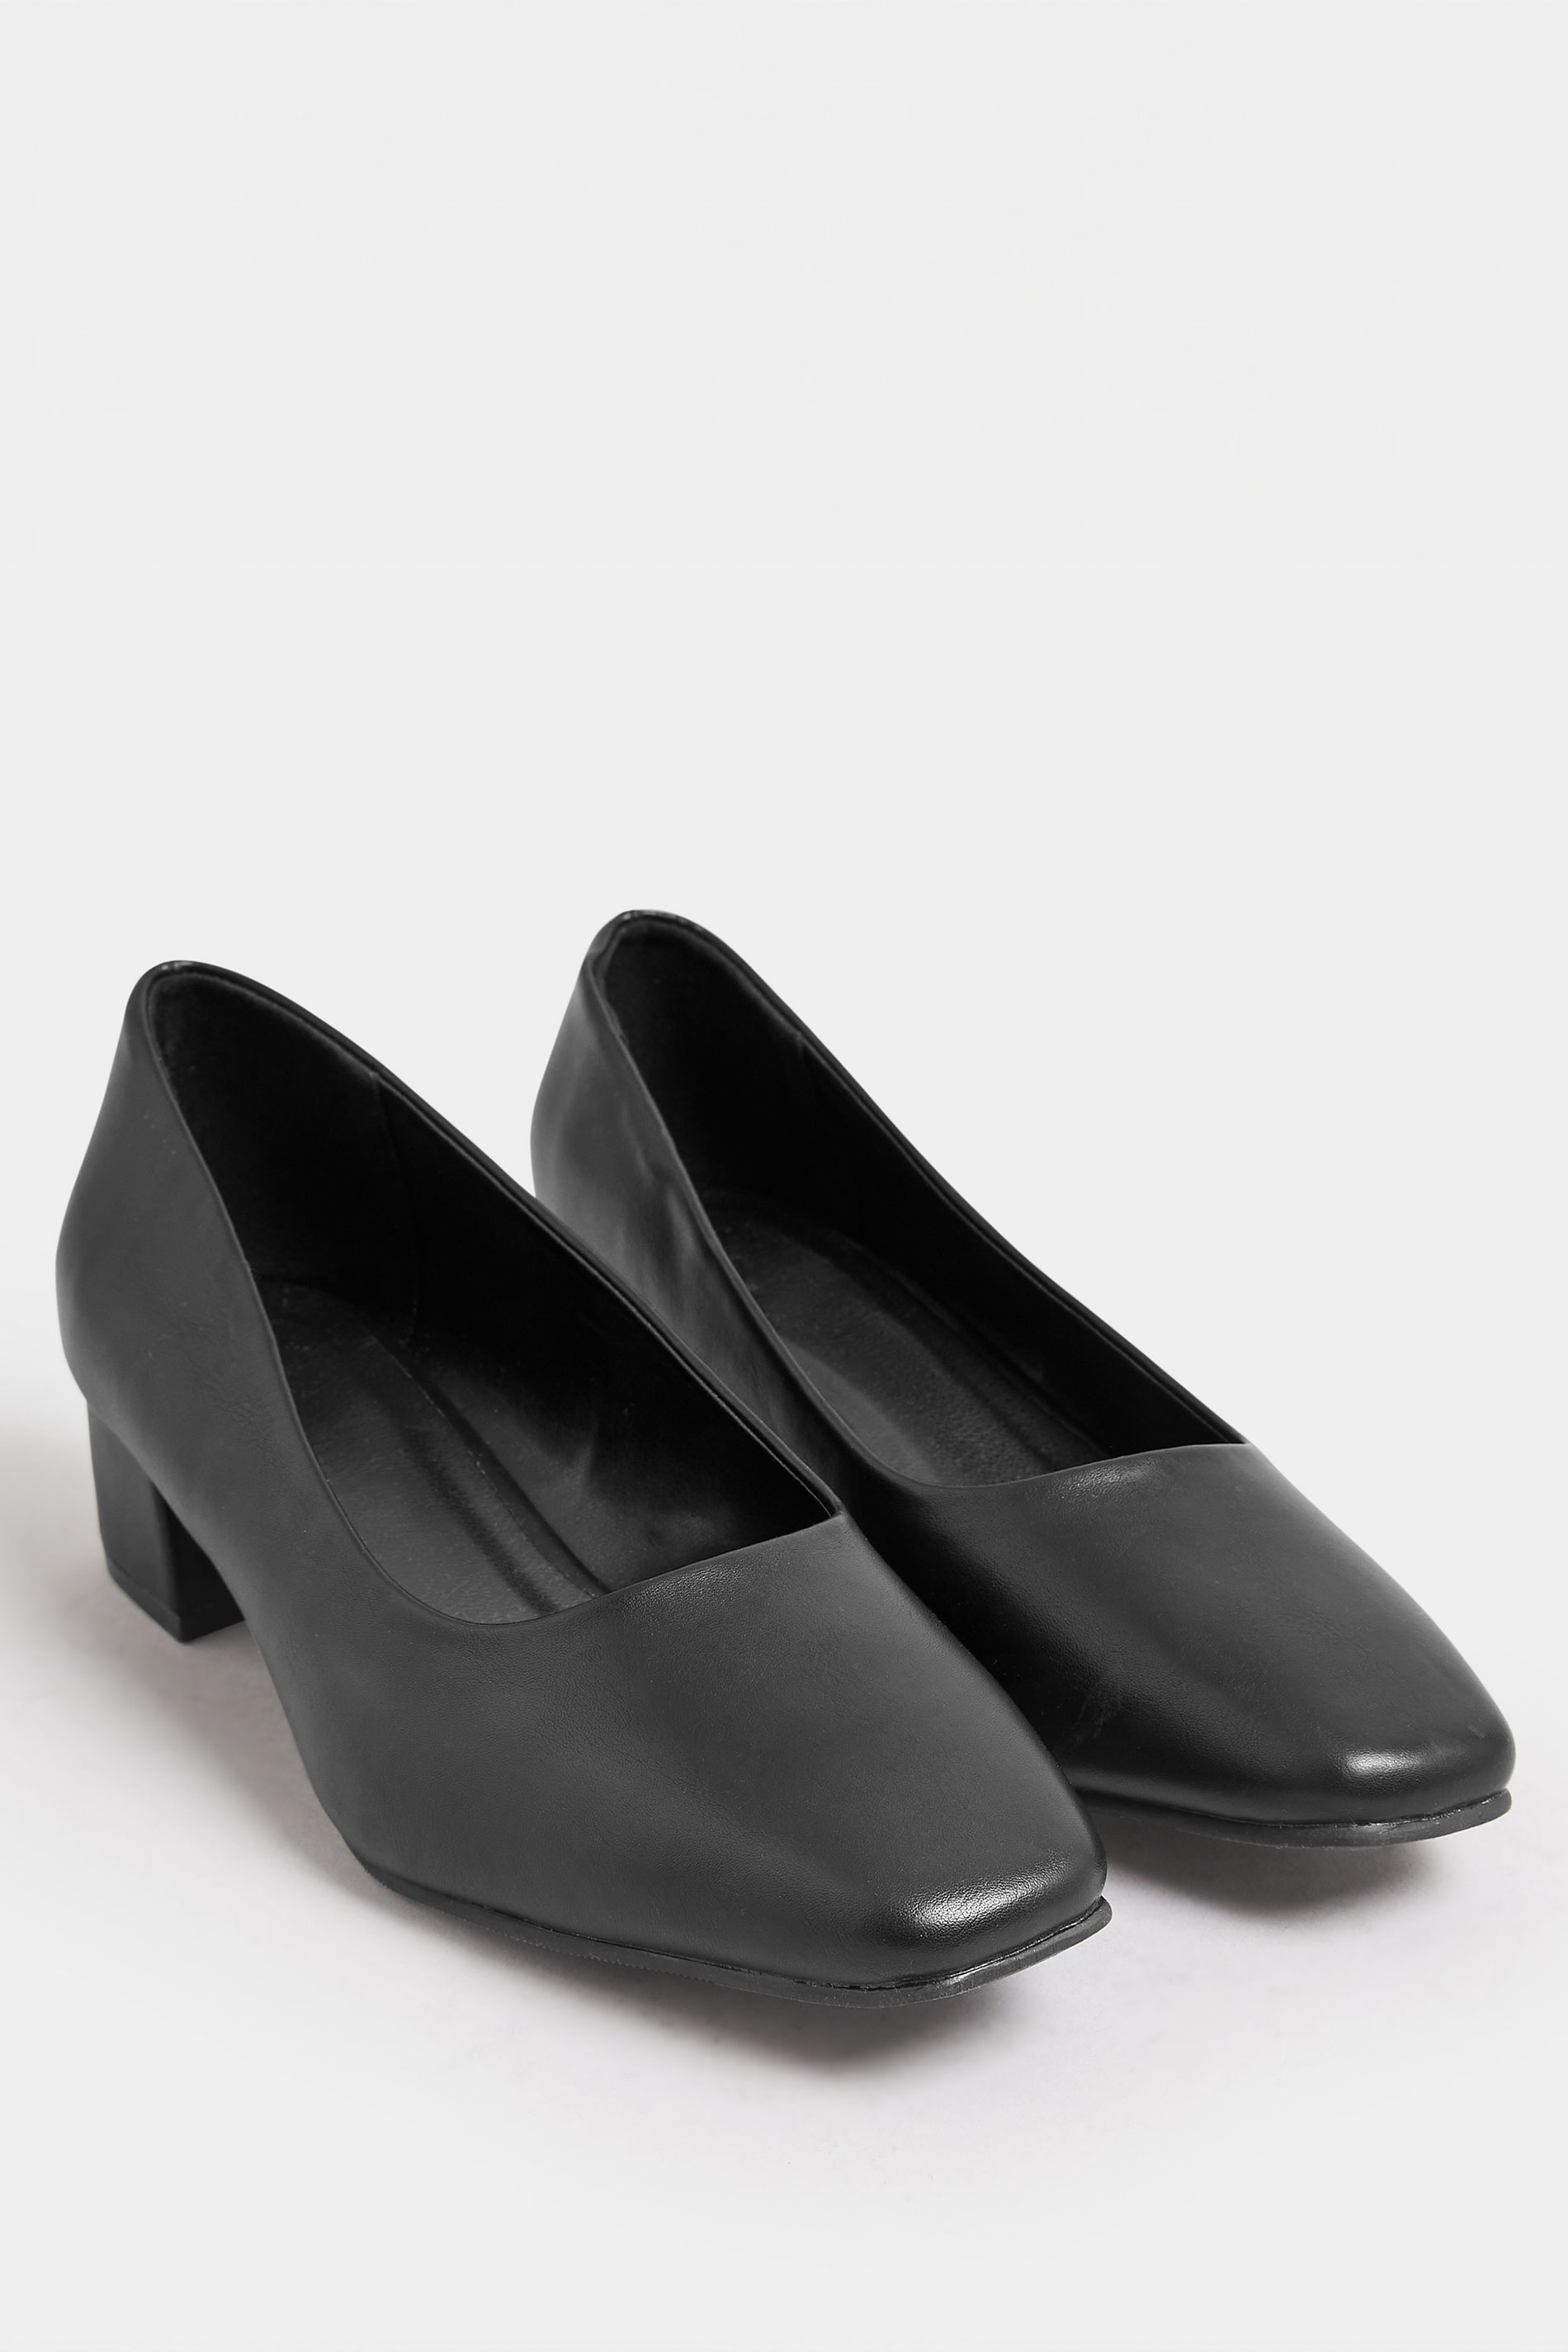 Black Faux Leather Block Heel Court Shoes In Extra Wide EEE Fit | Yours Clothing 2